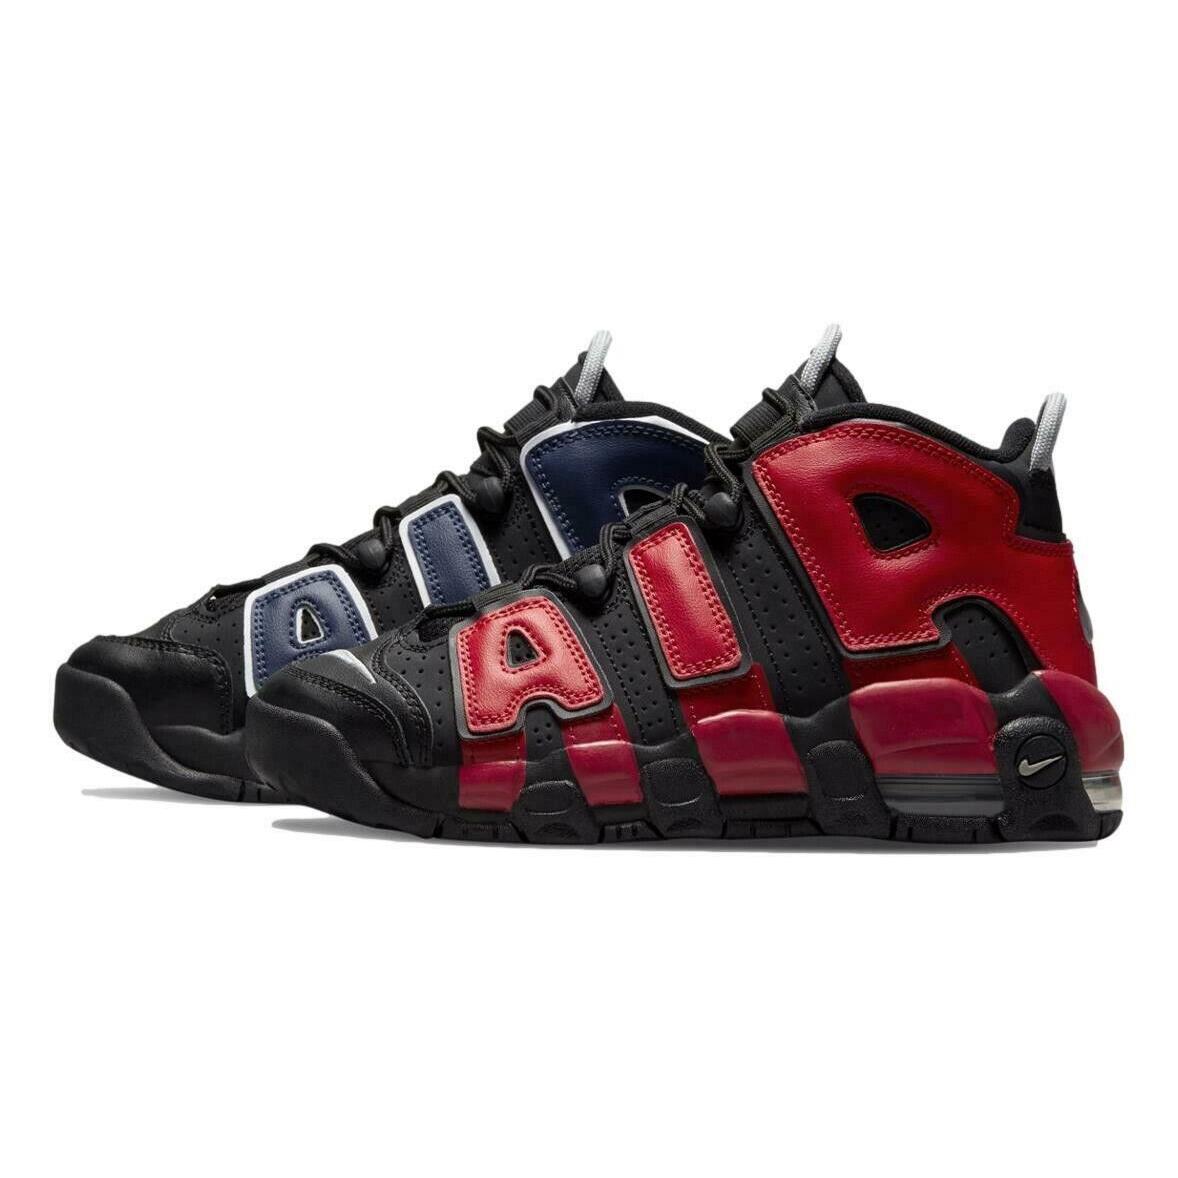 Nike Air More Uptempo Sneakers 3.5Y Black University Red Shoes Retro Kids